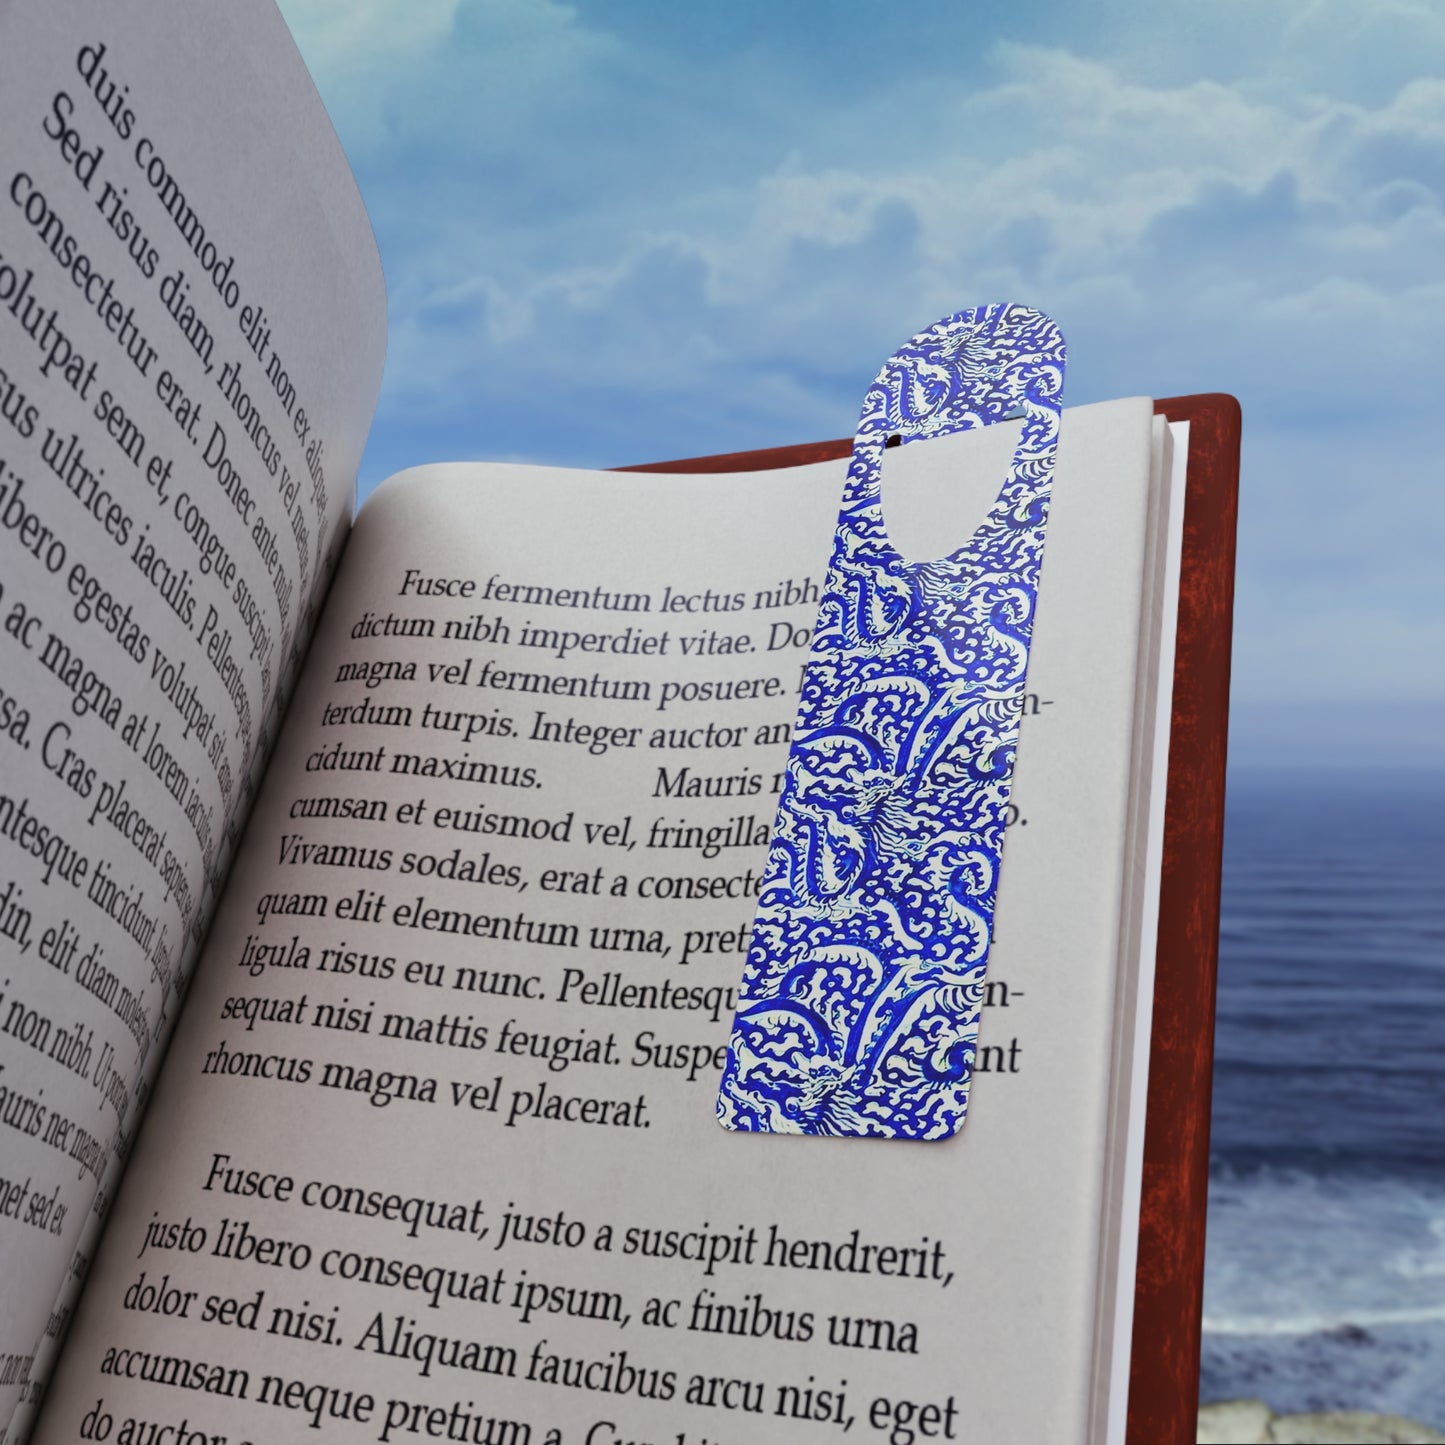 Sea of Chinese Dragons Ming Dynasty Blue and White Porcelain Reading Bookmark